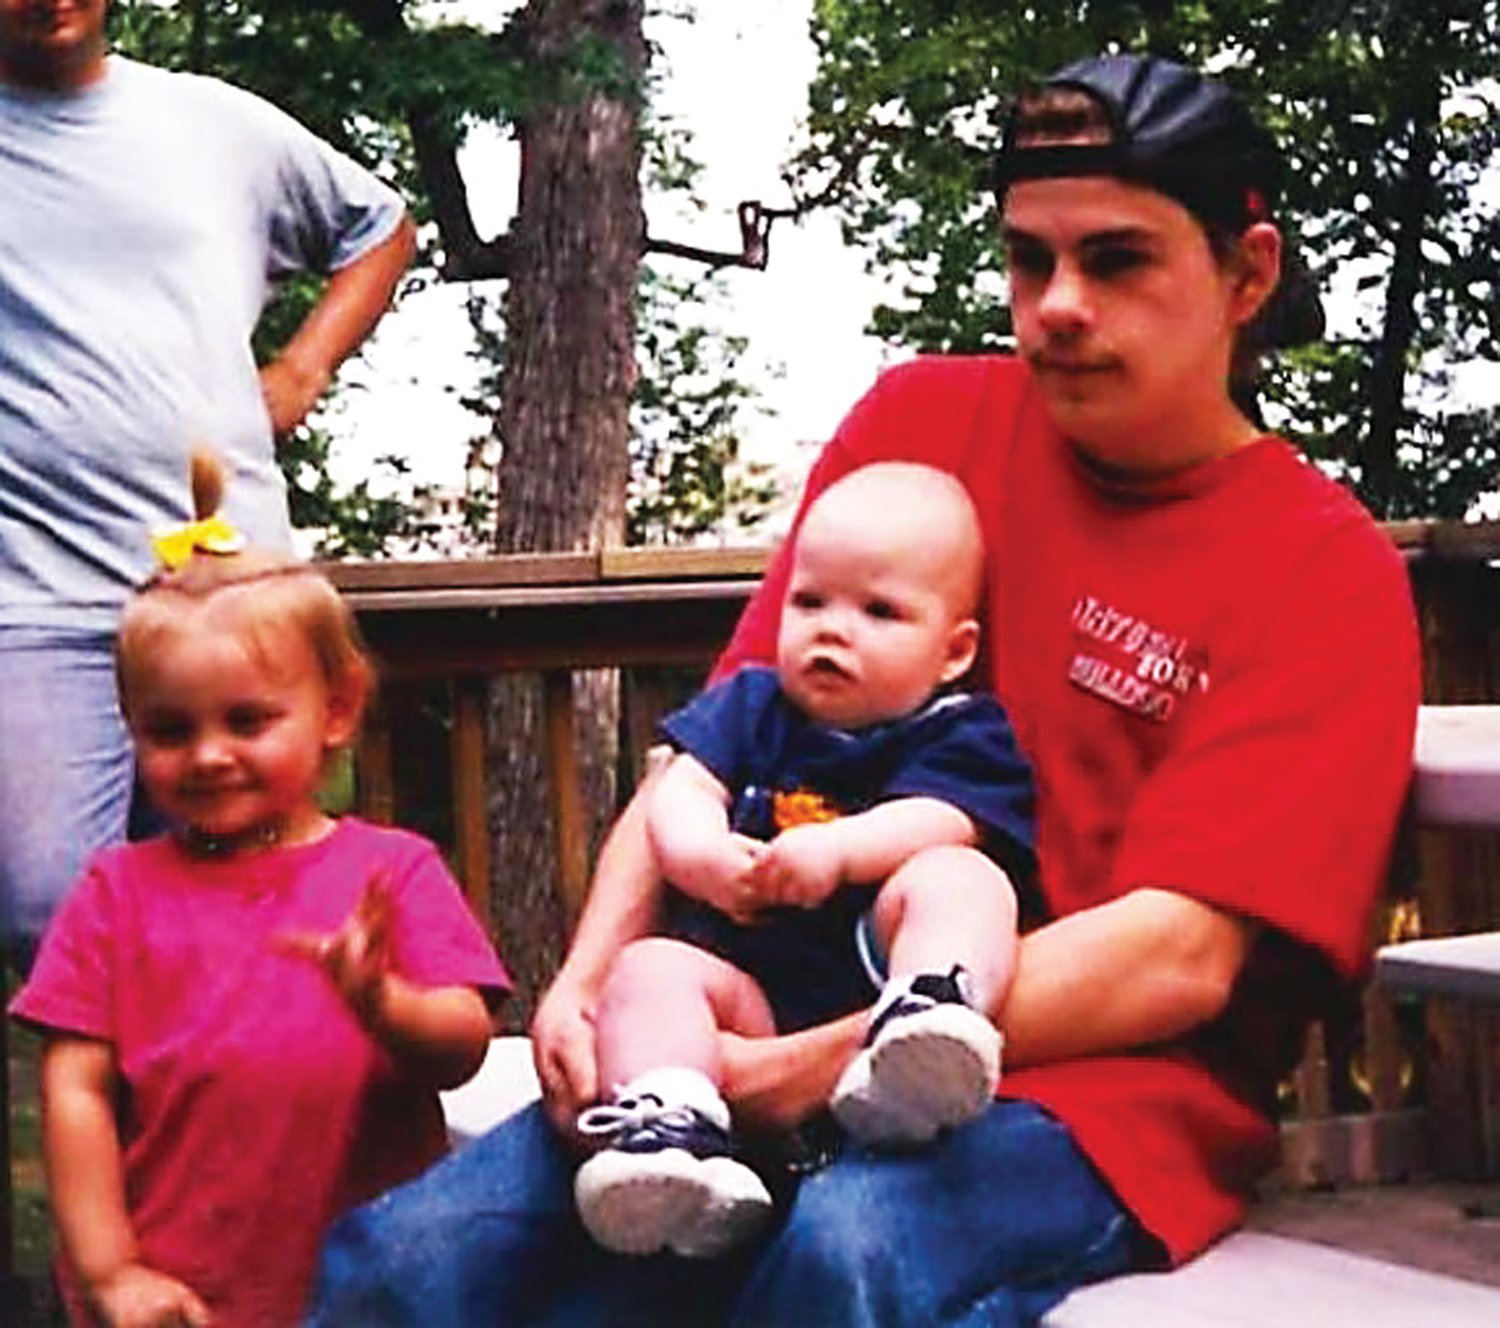 Adam Brundage with his two children. Photograph courtesy of the Bucks County District Attorney's Office